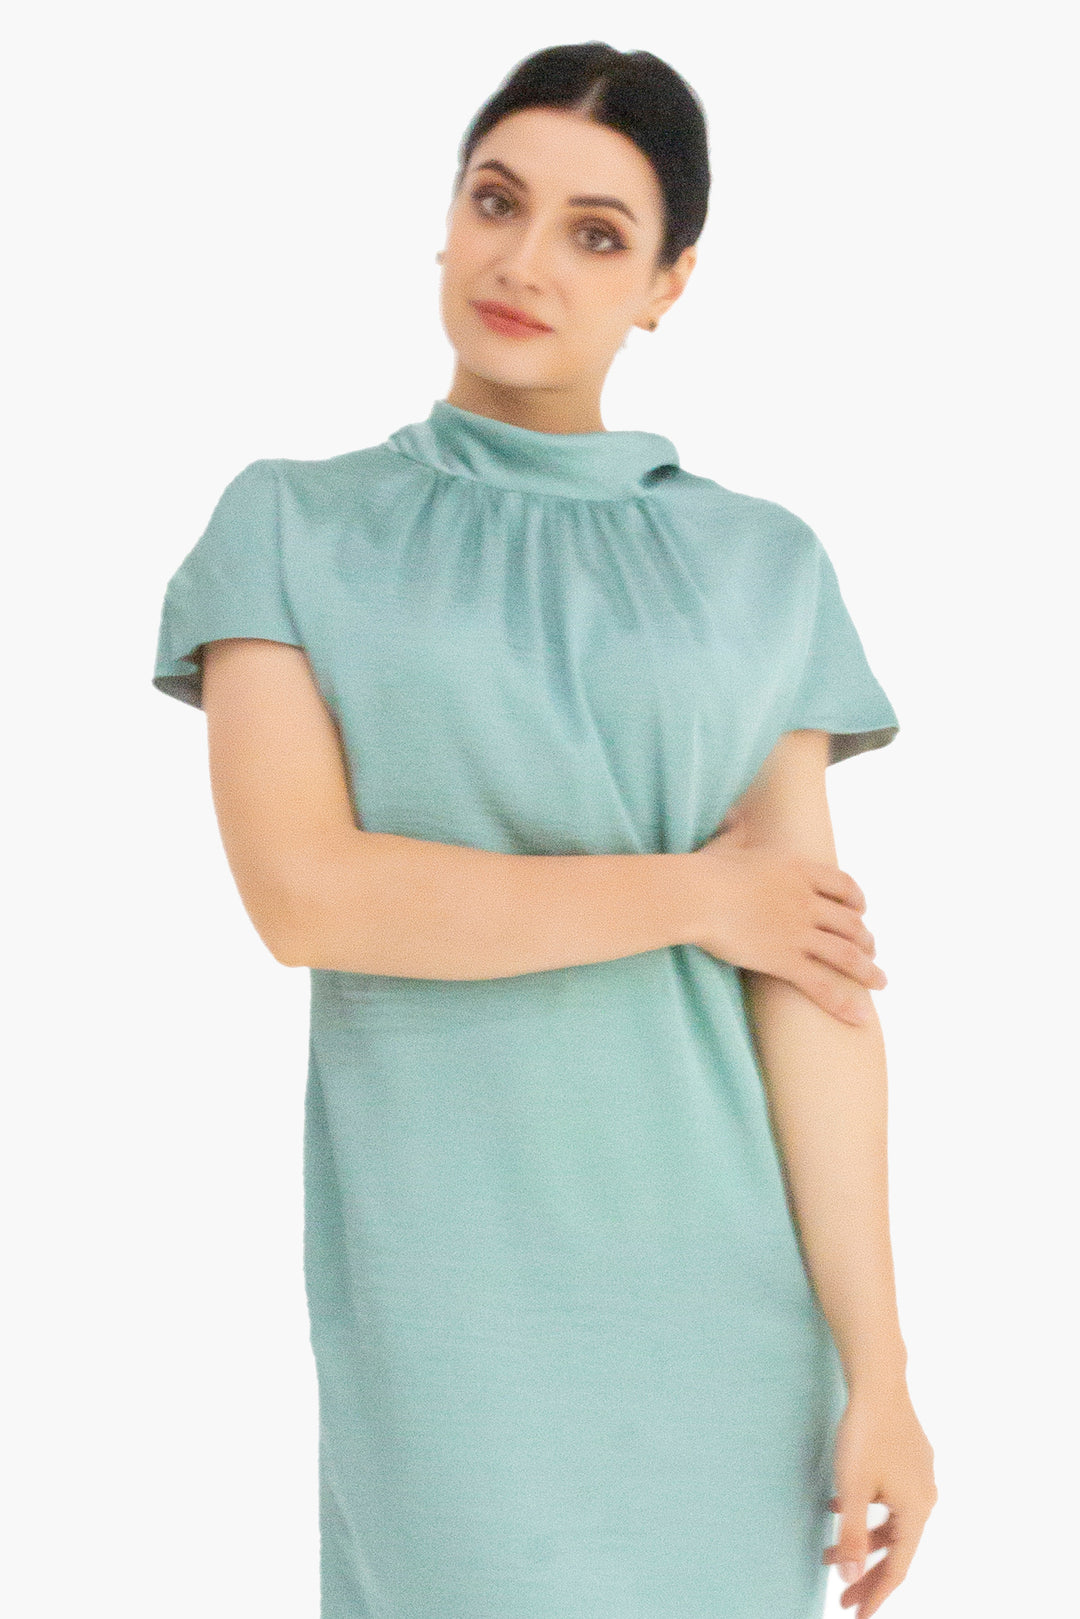 Lined Shift Dress with Back Drop-Collar and Tie